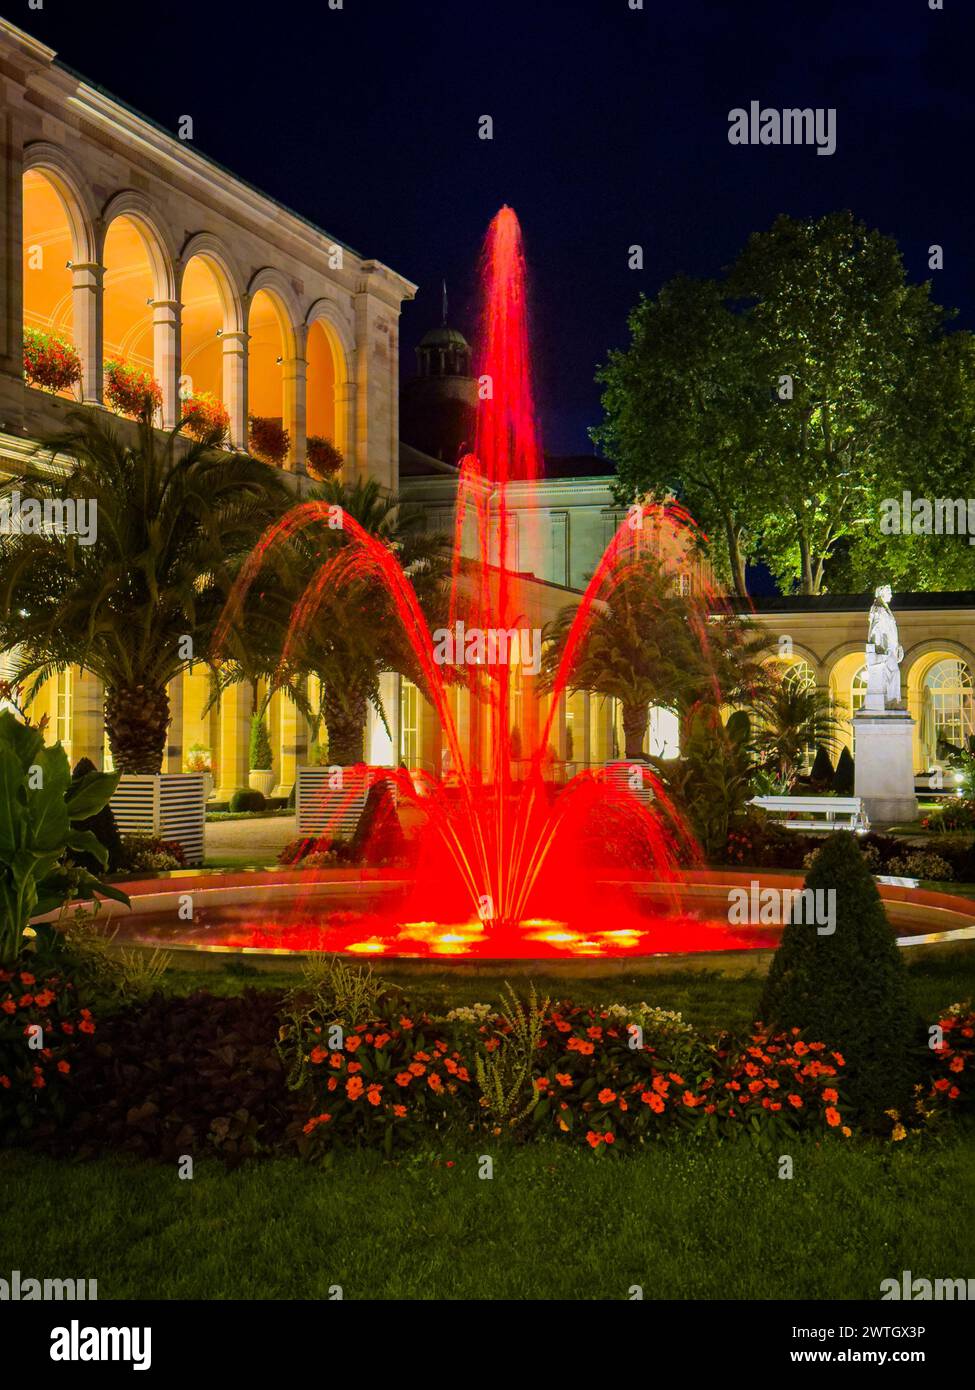 A fountain with red lights in Bad Kissingen Kurpark Park at night. Stock Photo